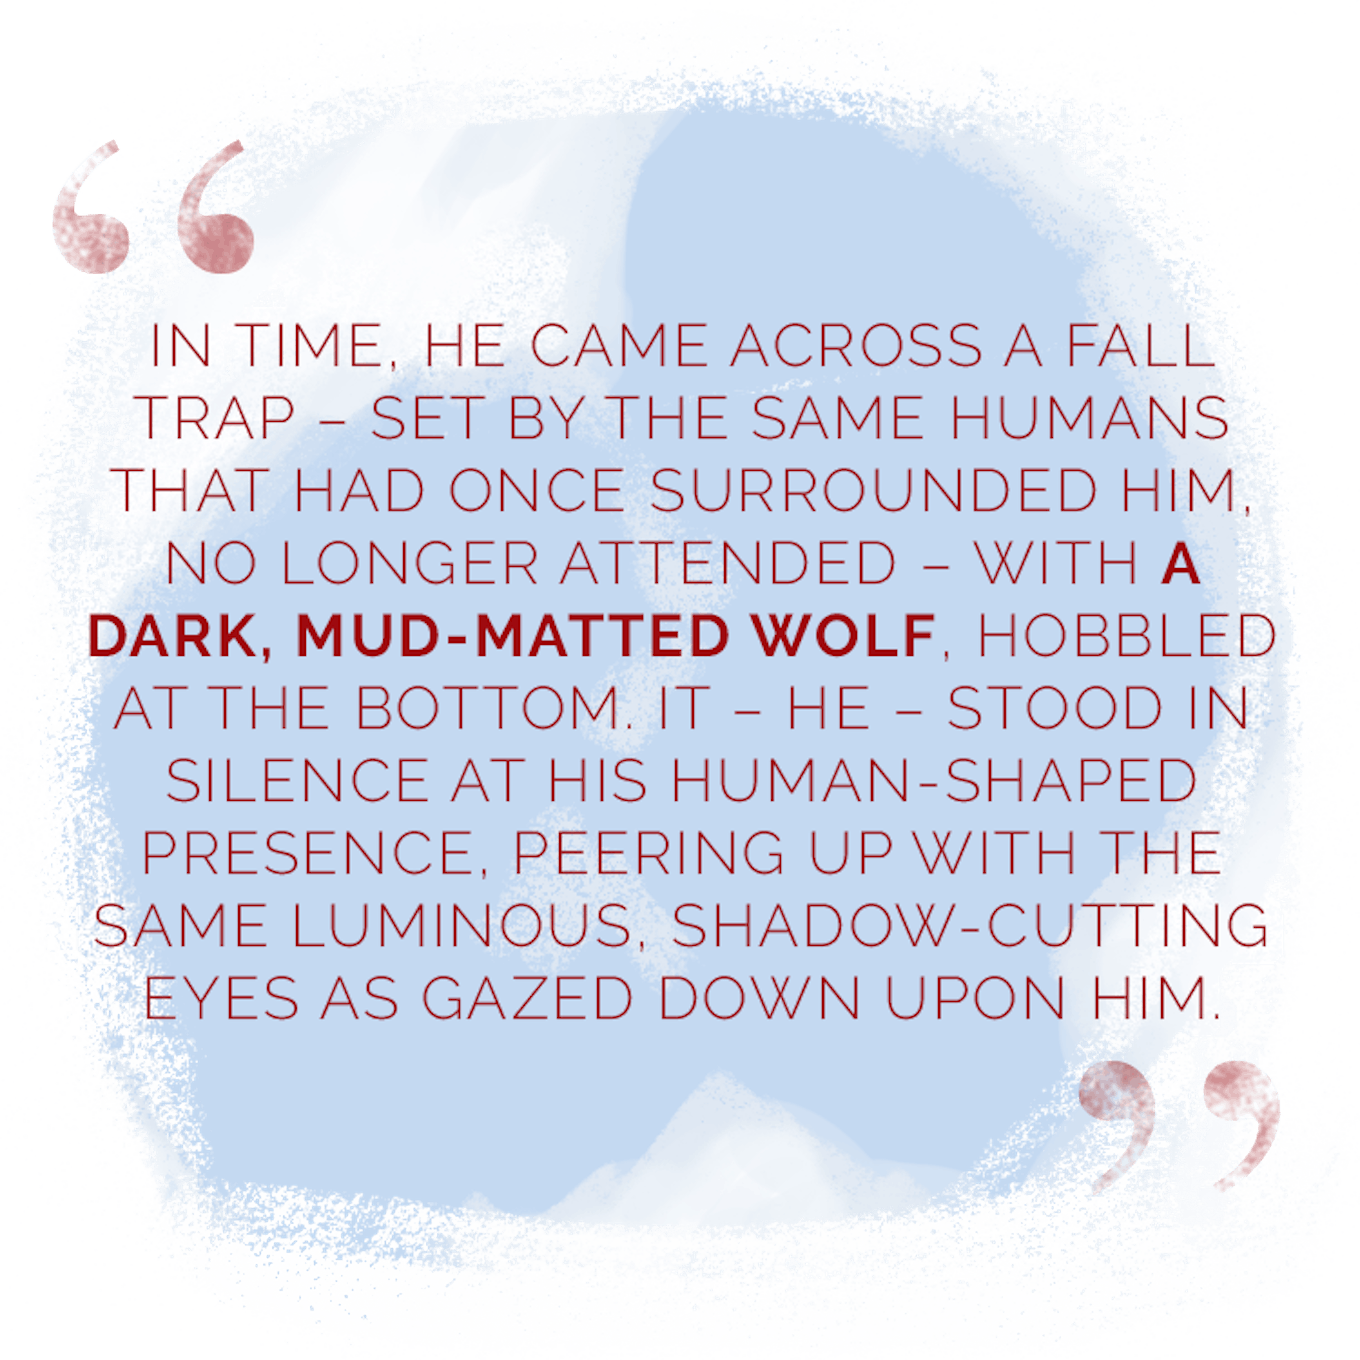 “In time, he came across a fall trap – set by the same humans that had once surrounded him, no longer attended – with a dark, mud-matted wolf, hobbled at the bottom. It – he – stood in silence at his human-shaped presence, peering up with the same luminous, shadow-cutting eyes as gazed down upon him.”